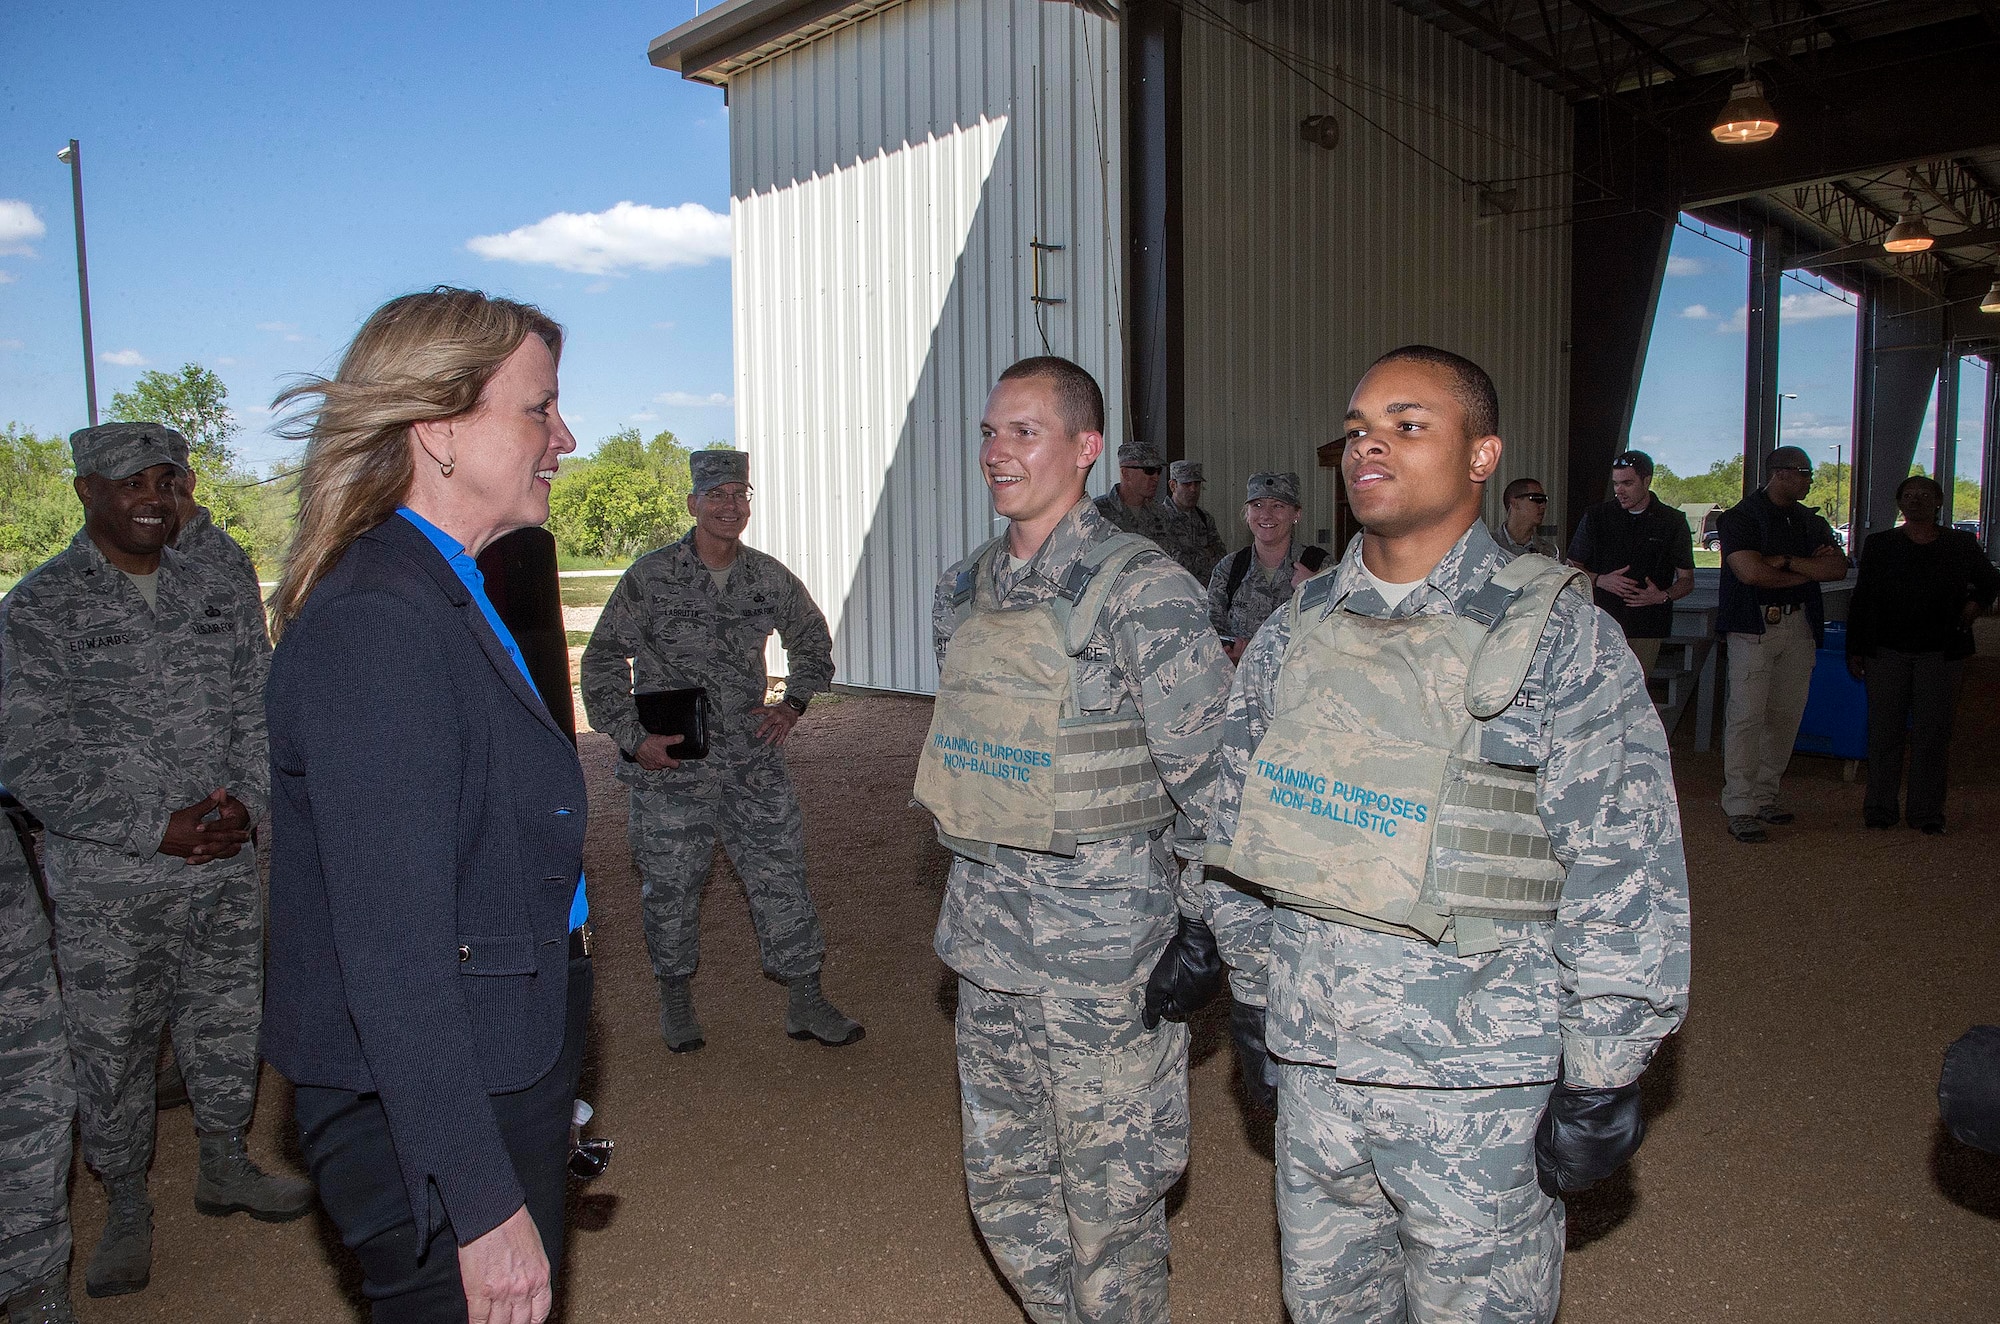 Secretary of the Air Force Deborah Lee James speaks with two basic trainees before a demonstration at the Basic Expeditionary Airmen Skills Training (BEAST) course March 22, 2016, at the 319th Training Squadron on Joint Base San Antonio-Lackland, Texas. James visited Lackland to view the Forward Operating Base of the Future, an Air Force initiative to increase energy efficiency at the BEAST site by converting one of the six zones into a completely solar powered area. James was given a tour of the BEAST complex, which hosts the Air Force basic military training's field week where a warrior ethos is instilled in trainees as they complete various combat and confidence building skills such as combatives, a leadership reaction course and courses on the U.S. Code of Conduct. (U.S. Air Force photo/Johnny Saldivar) 